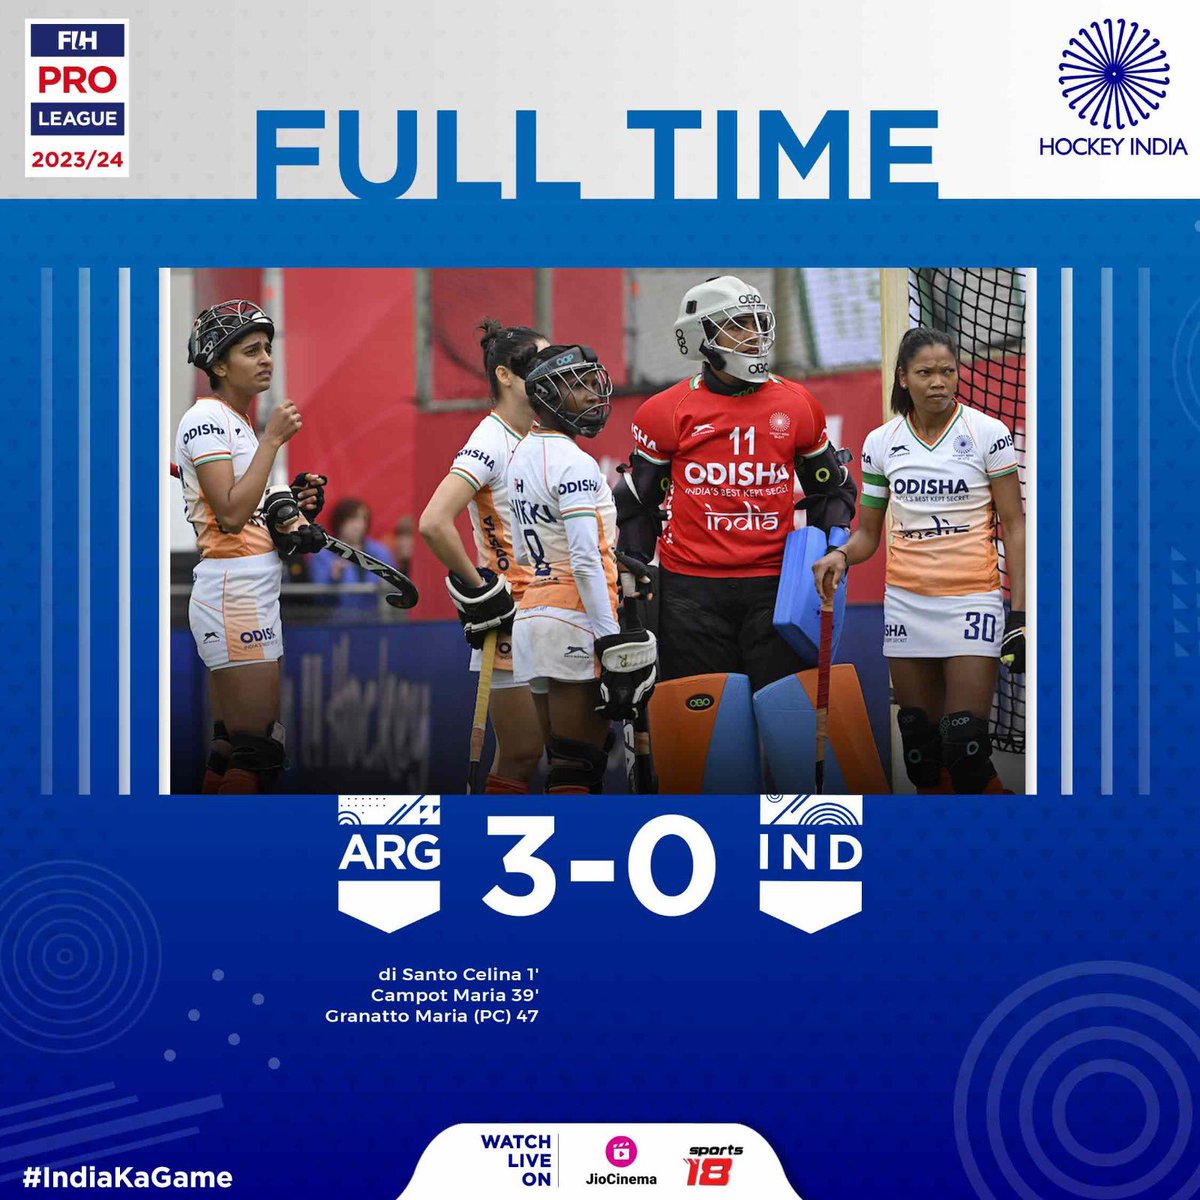 Tough result today. We gave it our all. We'll learn from this and come back stronger. Argentina 🇦🇷 3 - 0 India 🇮🇳 di Santo Celina 1' Campot Maria 39' Granatto Maria (PC) 47 #HockeyIndia #IndiaKaGame #FIHProLeague #IndianWomensTeam . . . . @CMO_Odisha @FIH_Hockey @IndiaSports